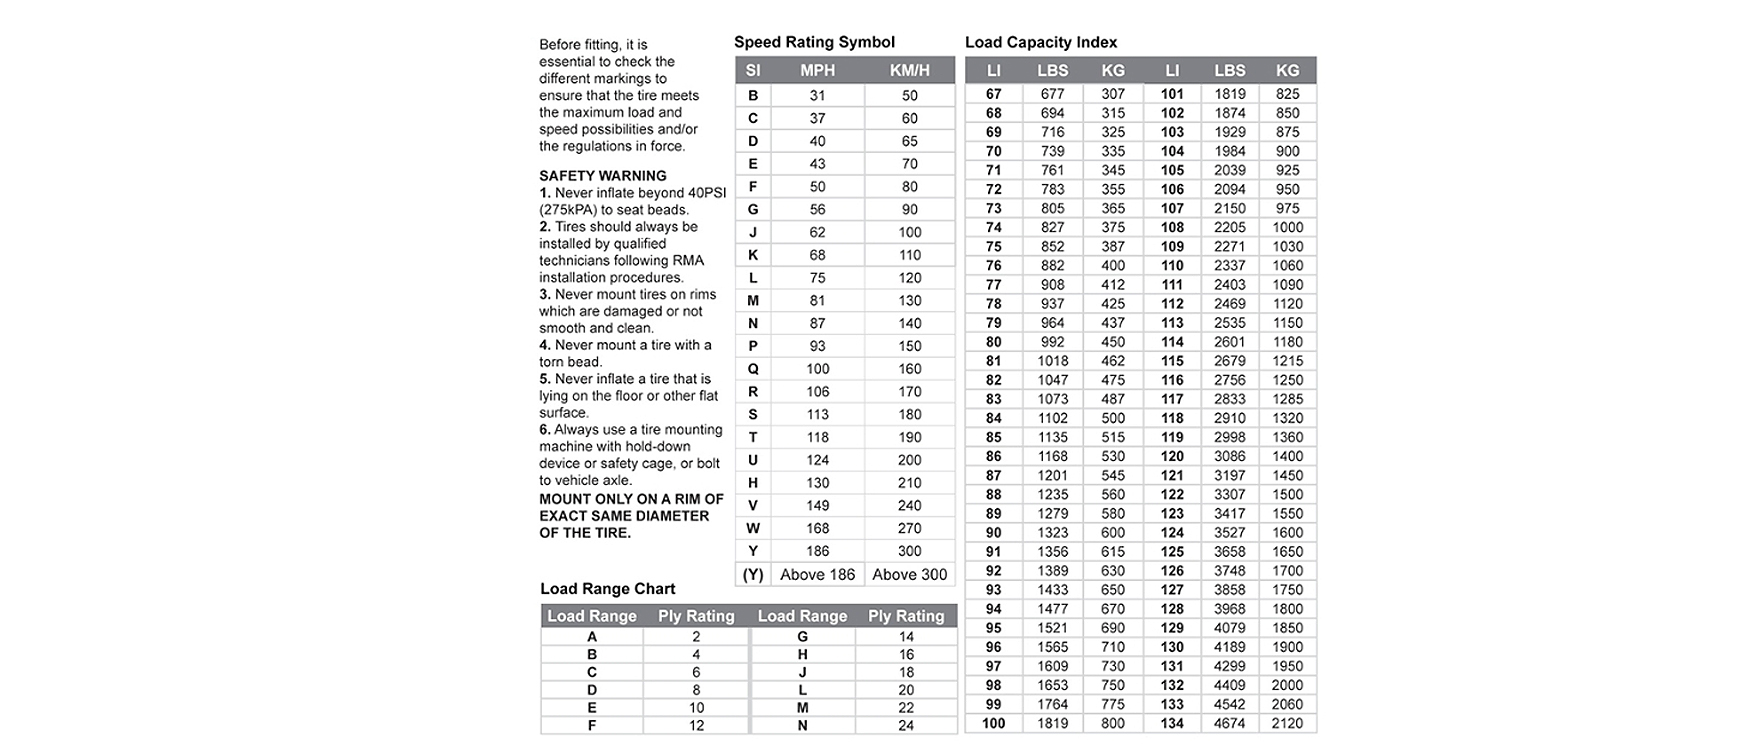 Trailer Tire Load Index Chart